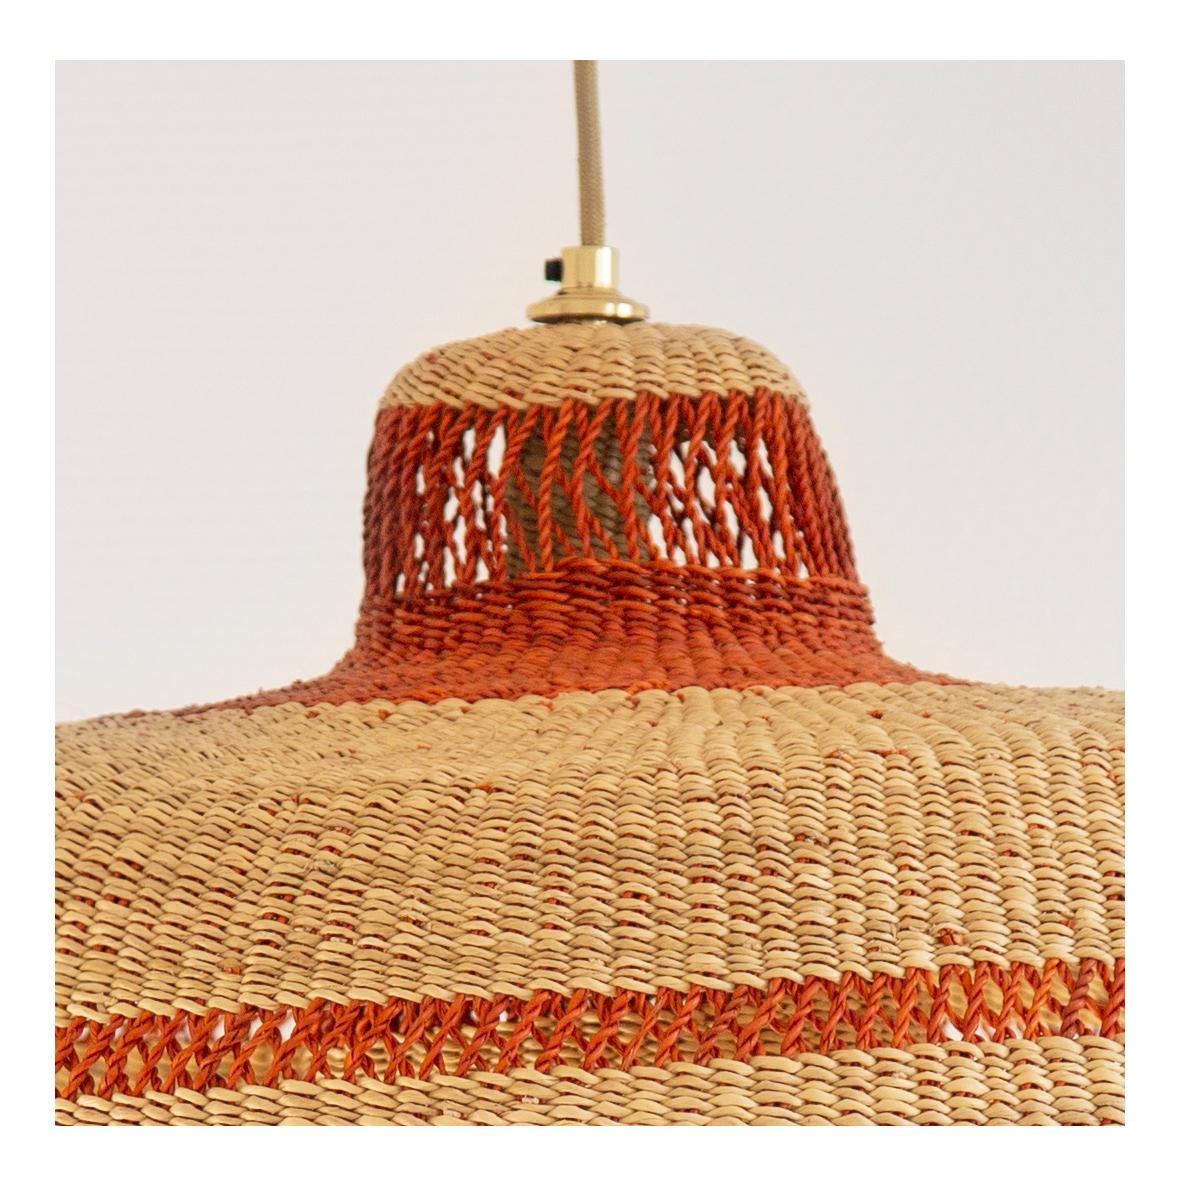 Large woven pendant lamp DEEPLY : 
Naturally elegant
Colour: Natural and ginger (terracotta)

Would you like to be transported to the Mediterranean? We can take you there with our large pendant lamp with it’s wide dome shape and natural colours